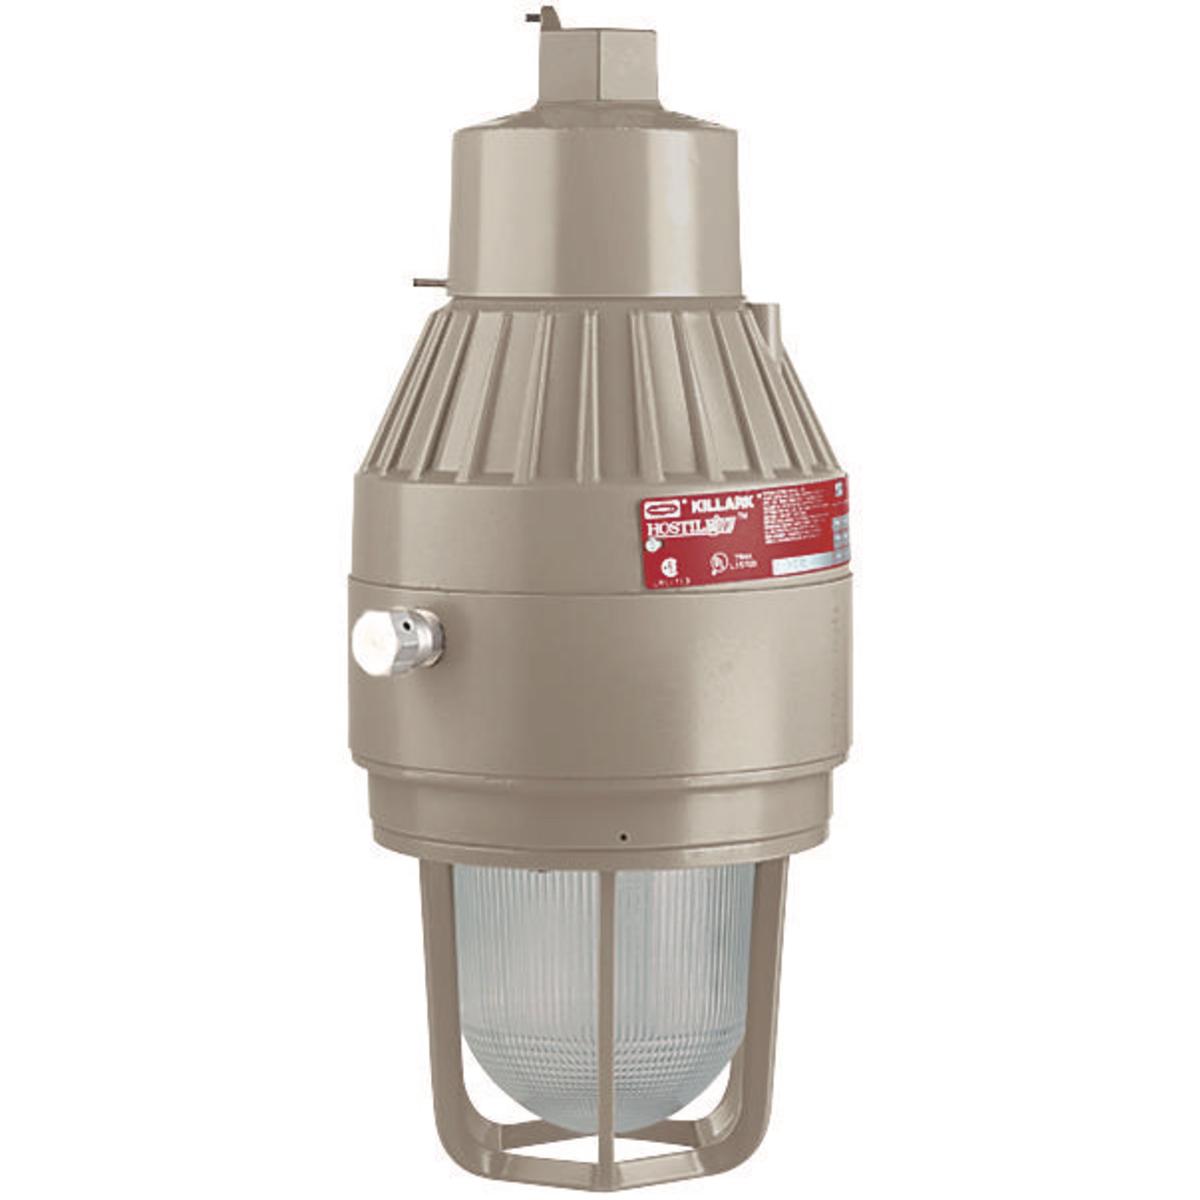 Hubbell EEQ2626E30A2G EEQ Emergency CFL 26N26E 120/277V Pendant with Guard  ; Quad-Pin long-life triple-tube compact ; Fluorescent lamps included ; Choice of Pendant, Ceiling, Wall or Stanchion mount ; Factory Sealed - No external seal required ; Corrosion resistant-Copper-fre